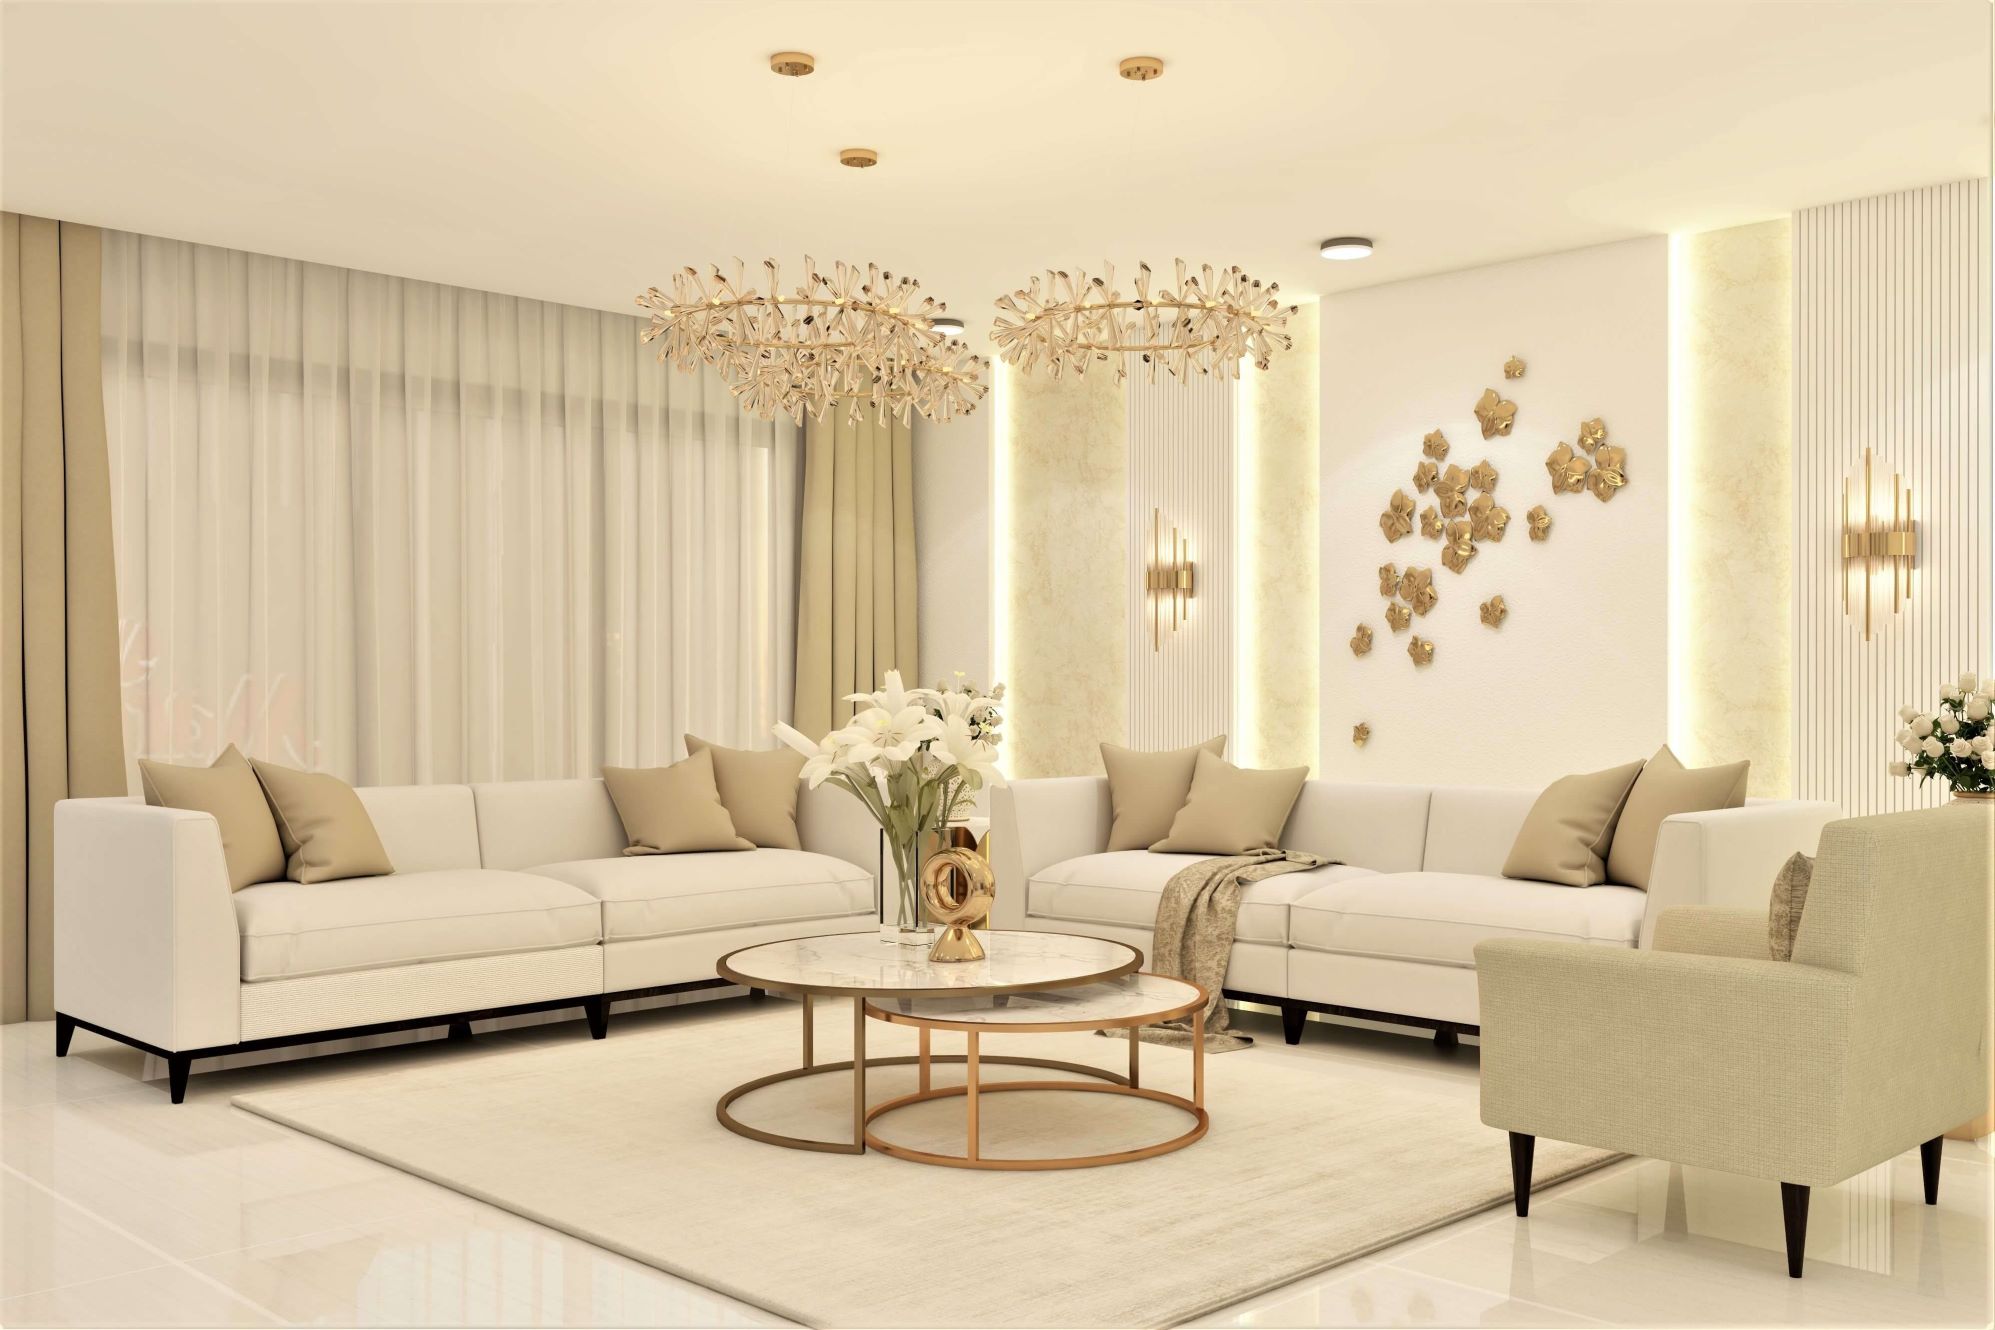 Shimmering Upgrades: Enhancing Your Home With Glints Of Gold